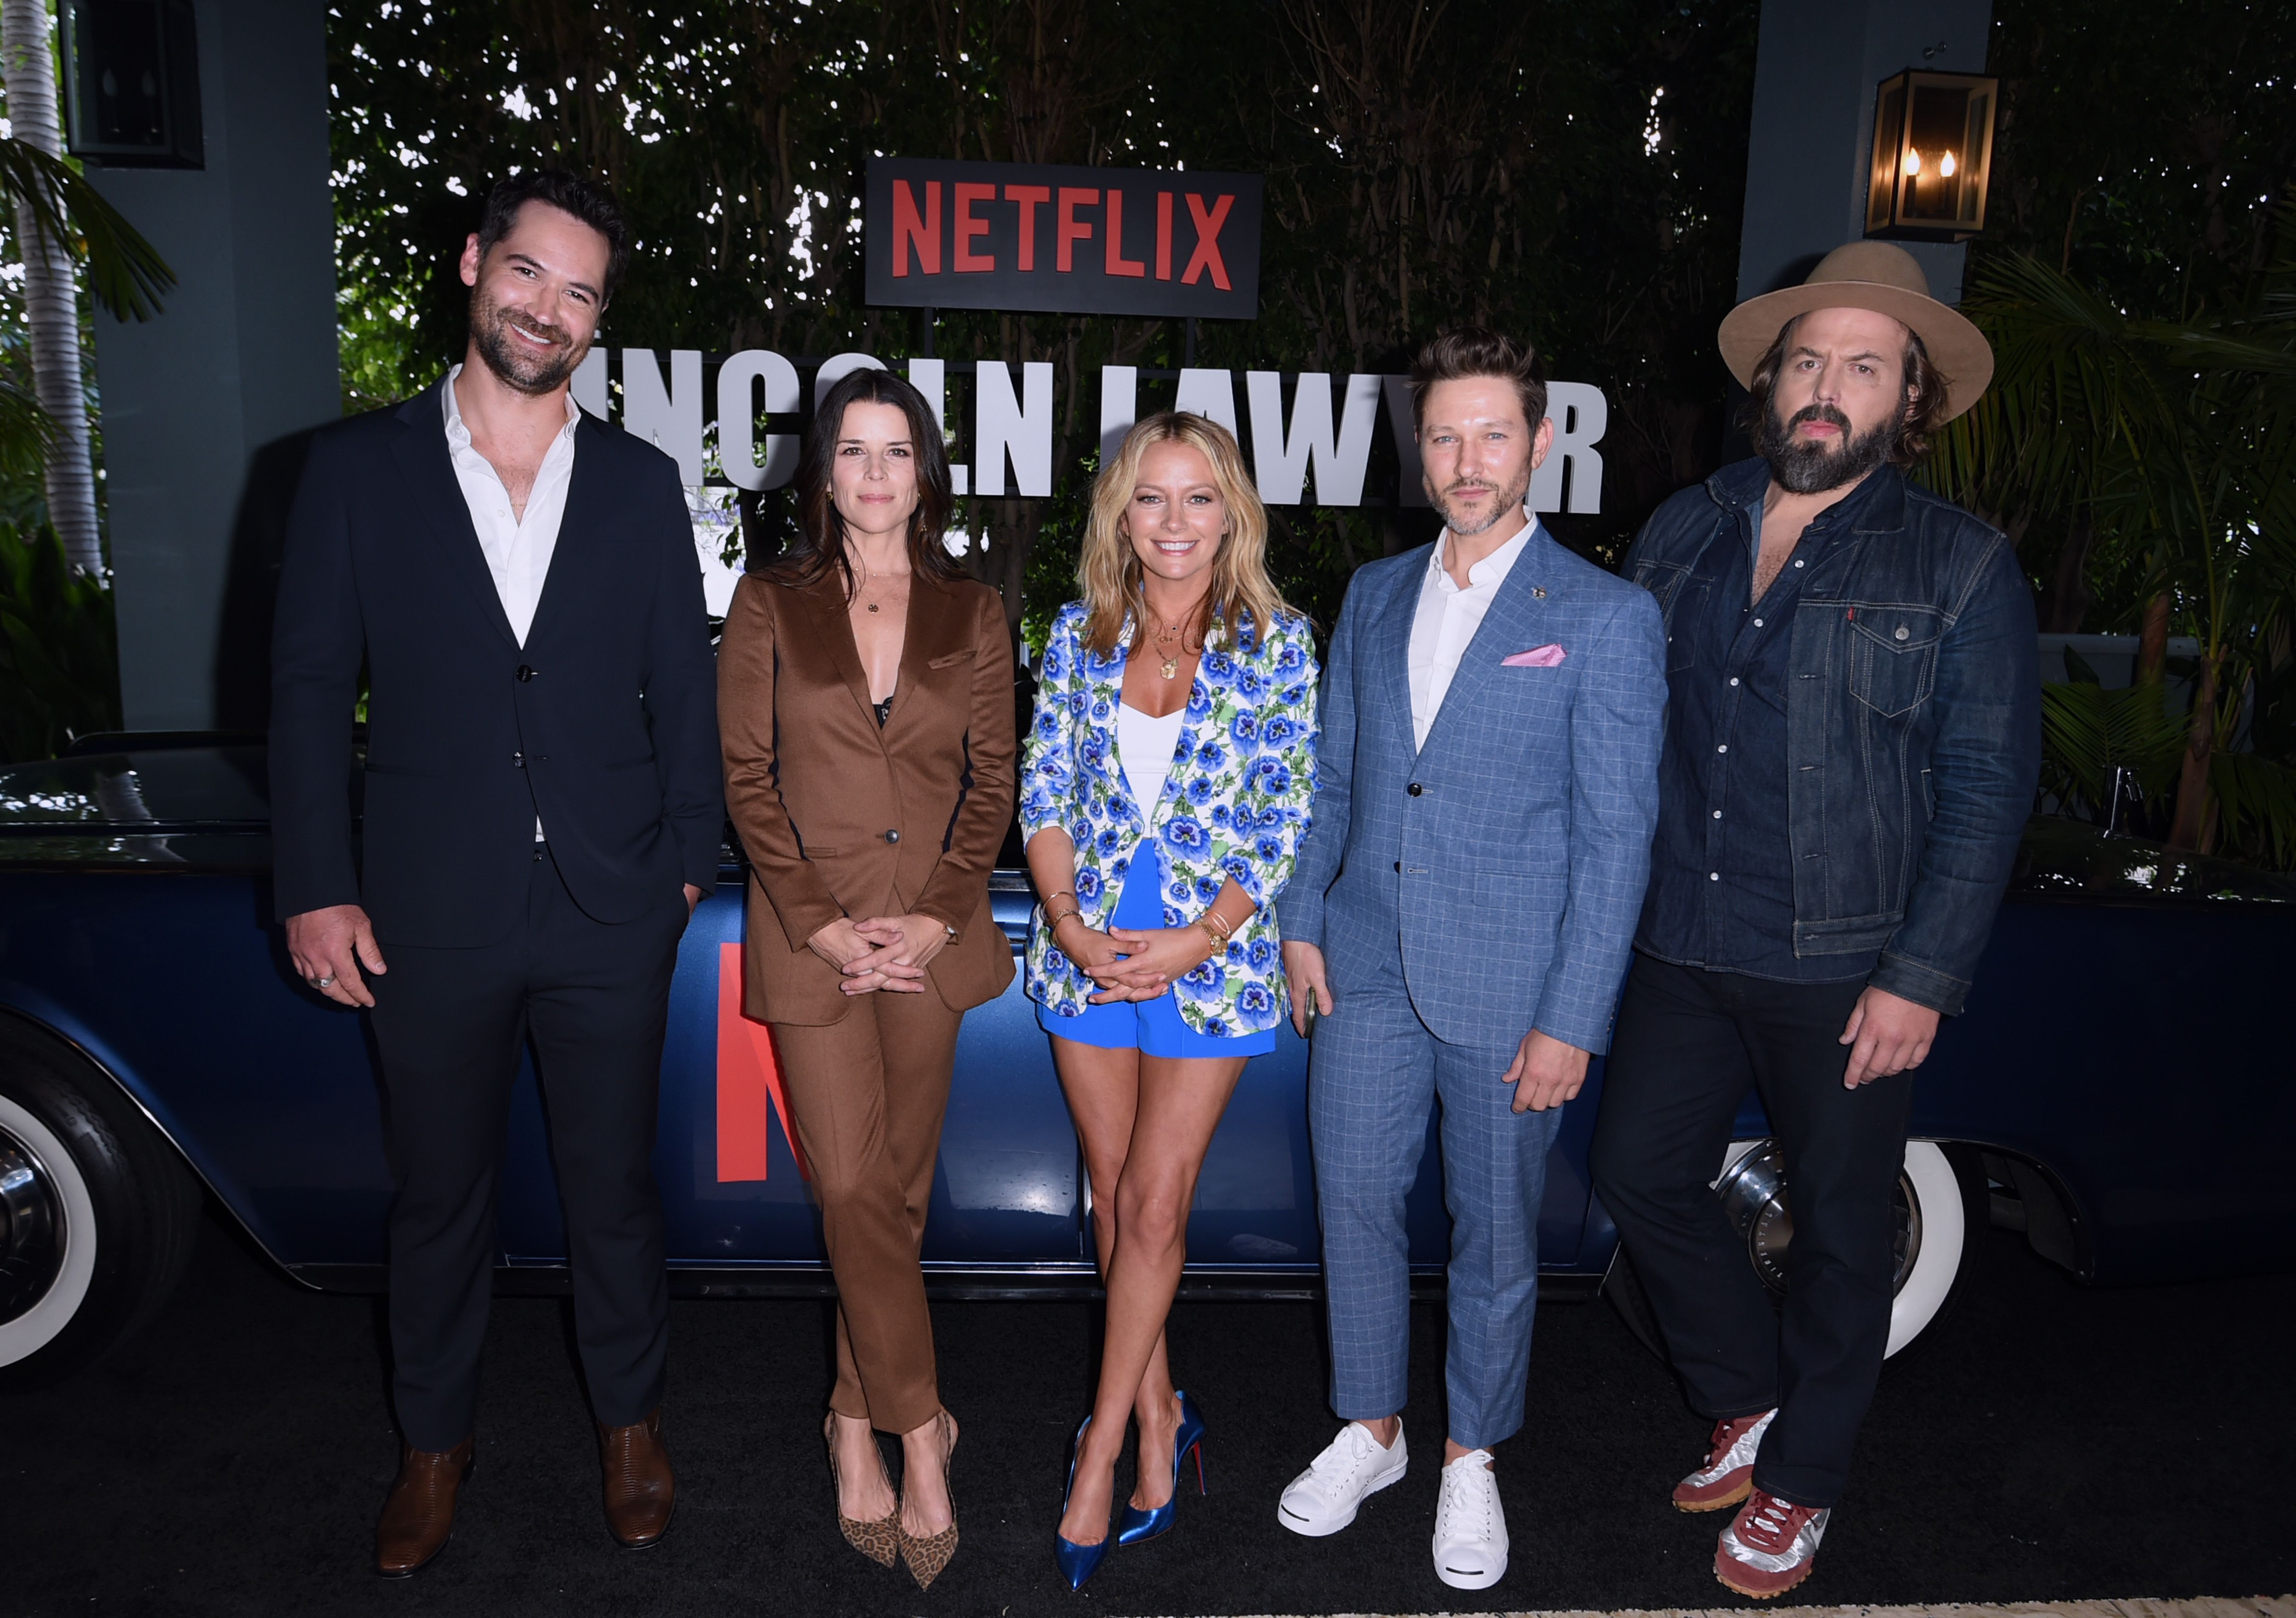 "The Lincoln Lawyer" cast members Manuel García-Rulfo (far left), Neve Campbell (second to left), Becki Newton (center), Michael Graziadei (second to right), and Angus Sampson (far right) at the Netflix series' special screening at The London in West Hollywood, California on May 09, 2022. | Source: Getty Images